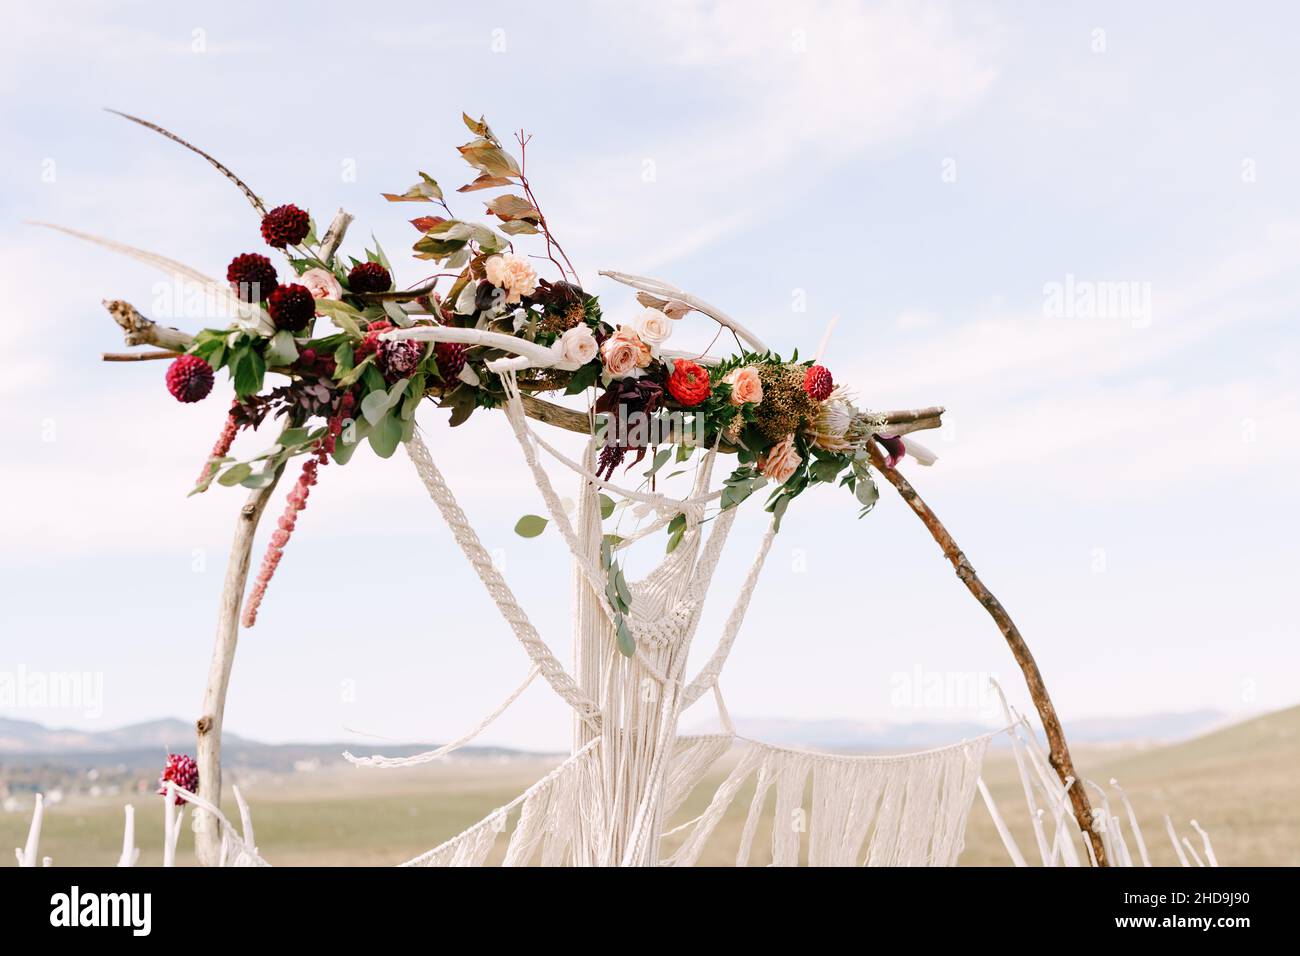 Wedding arch decorated with bright flowers and white macrame lace Stock Photo